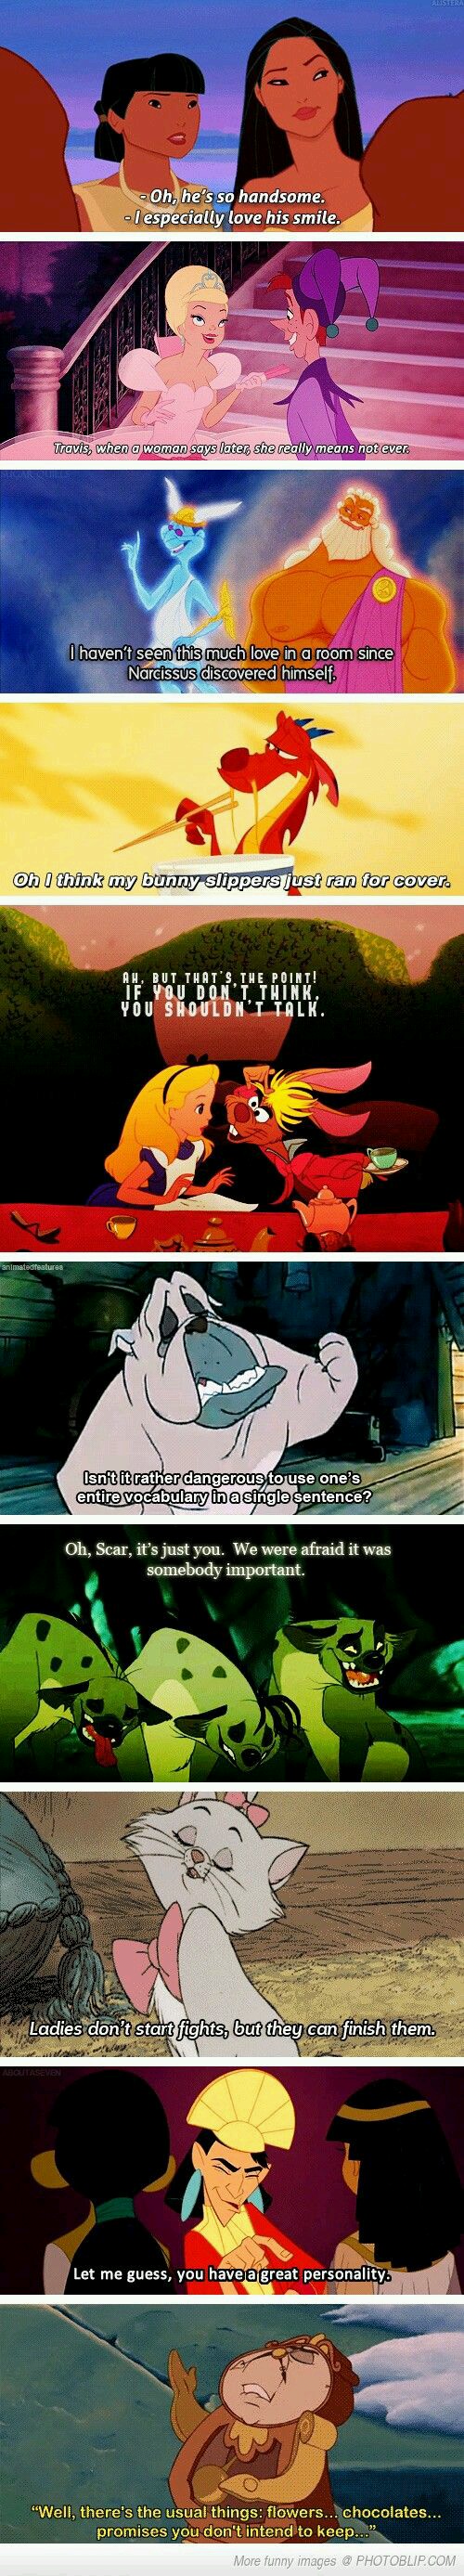 Disney characters throw some pretty amazing shade